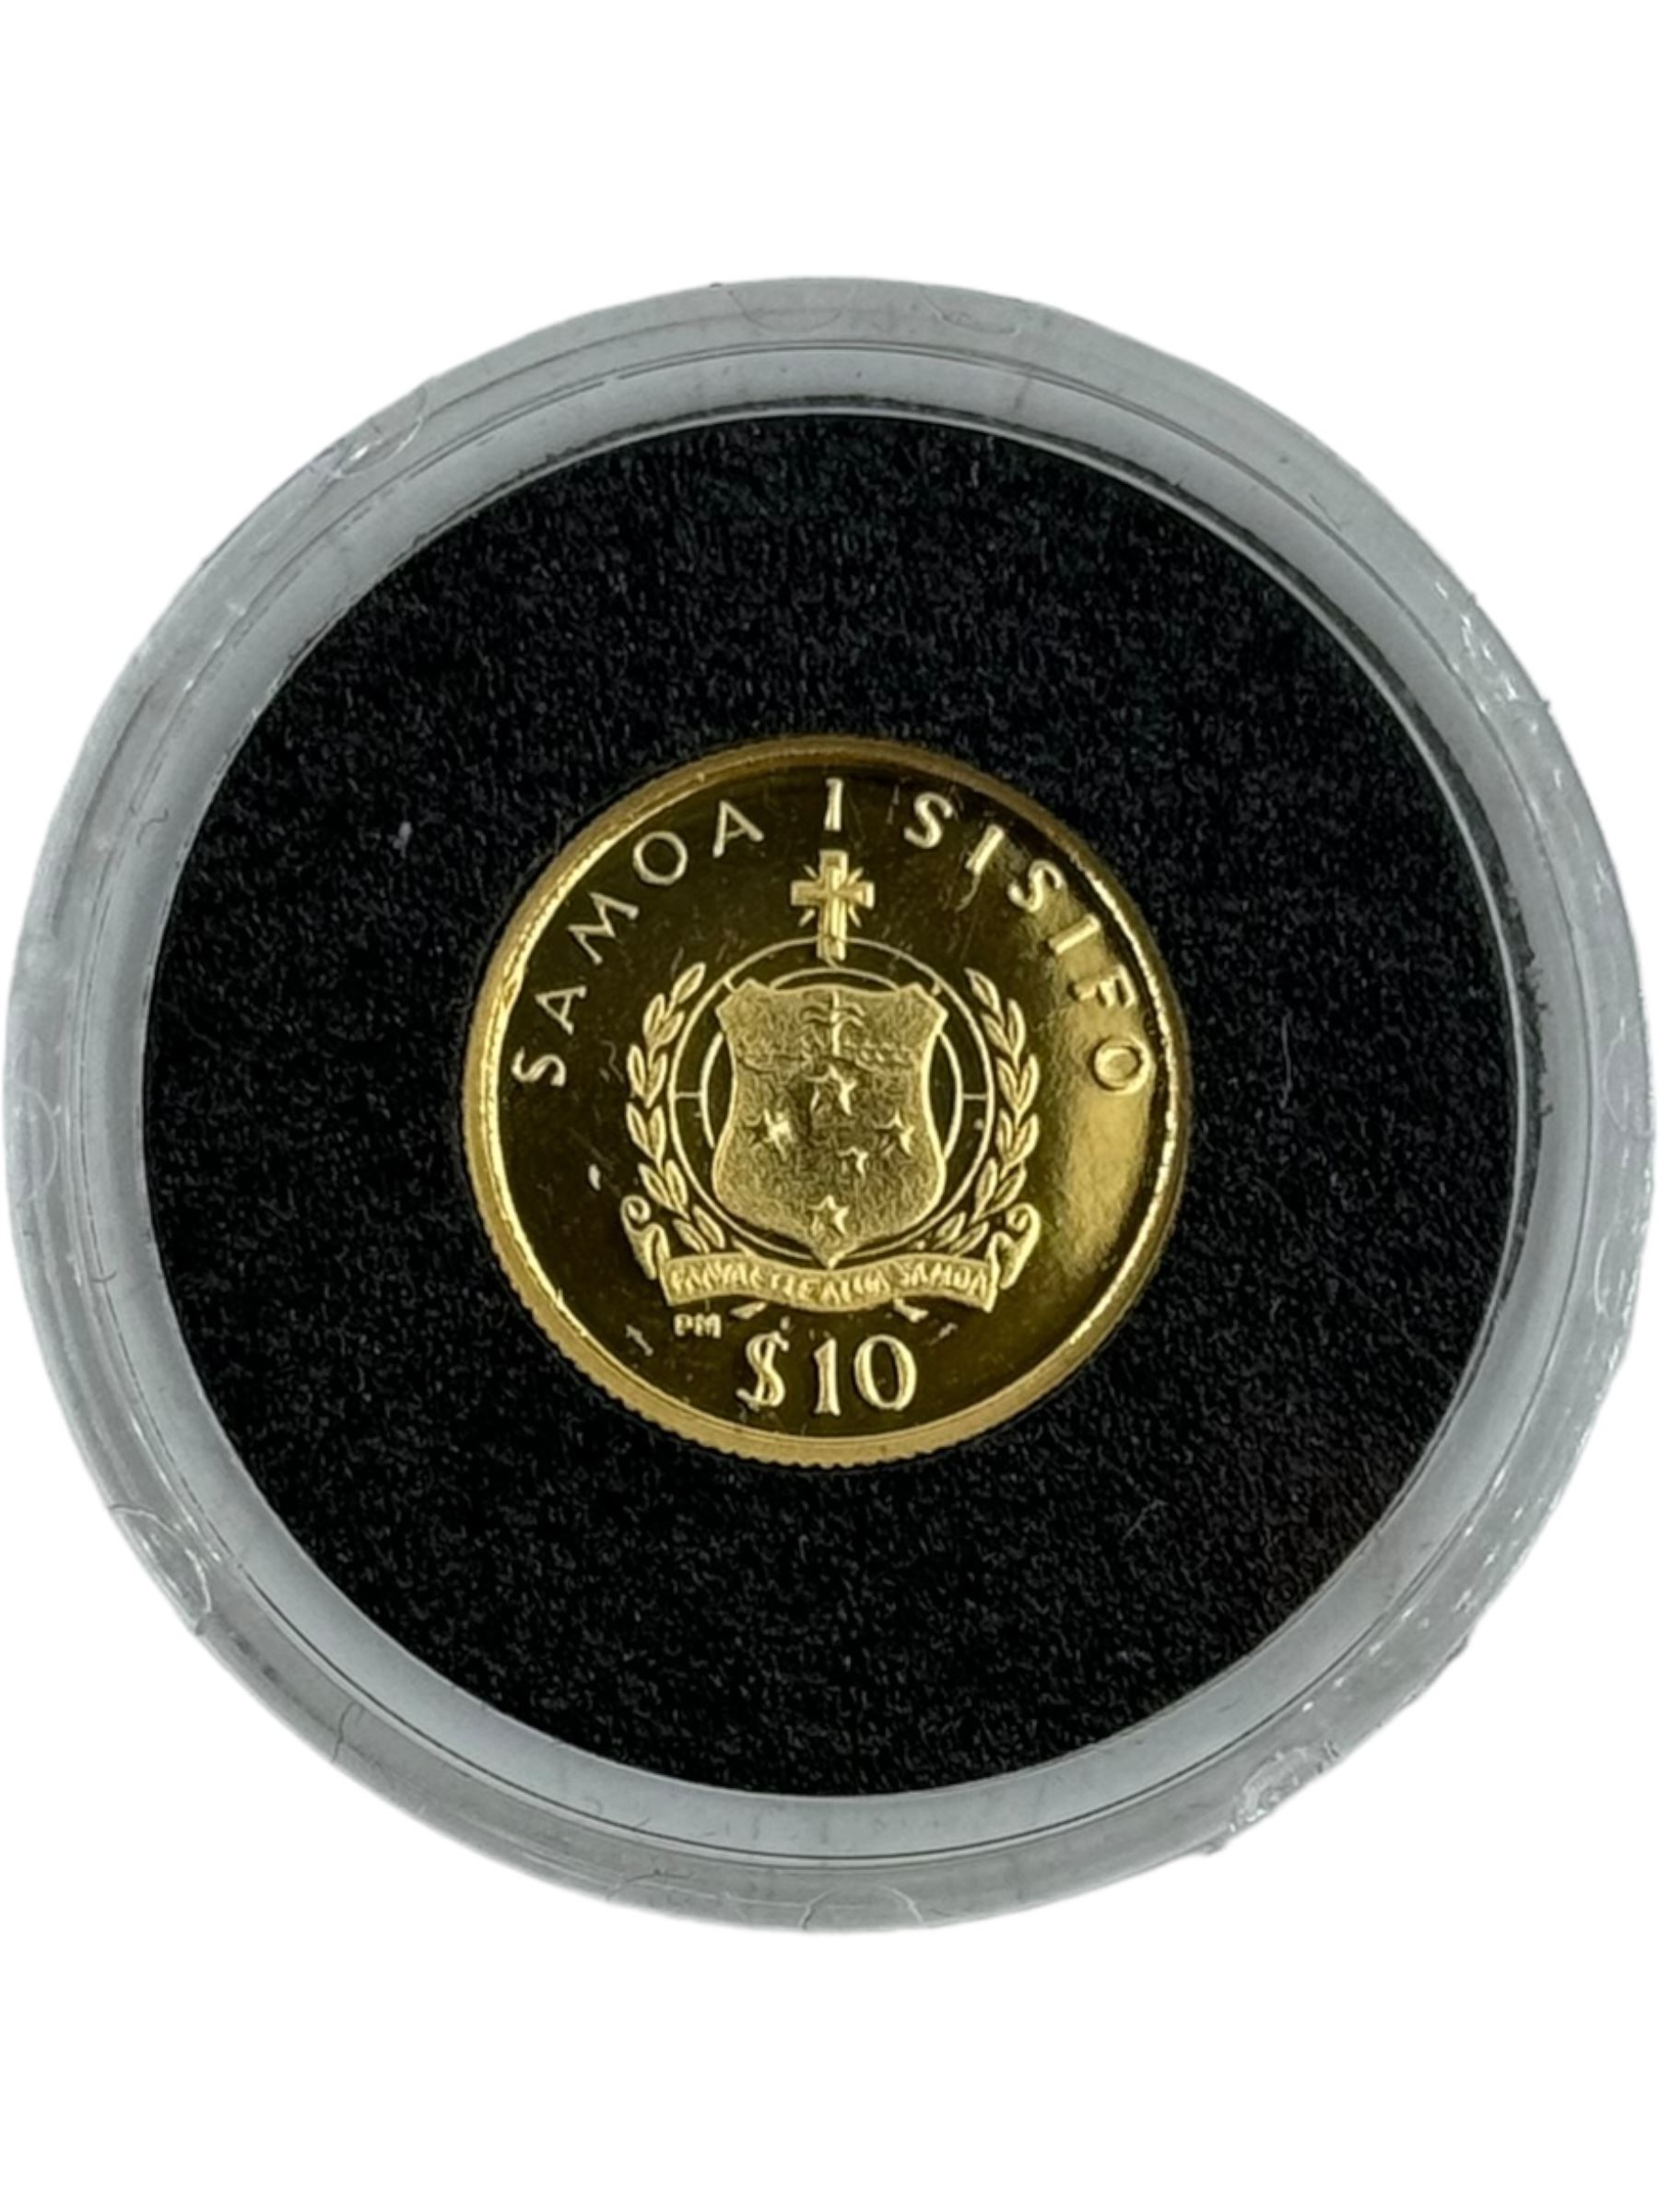 Four one twenty-fifth of an ounce 24 carat gold coins - Image 5 of 9